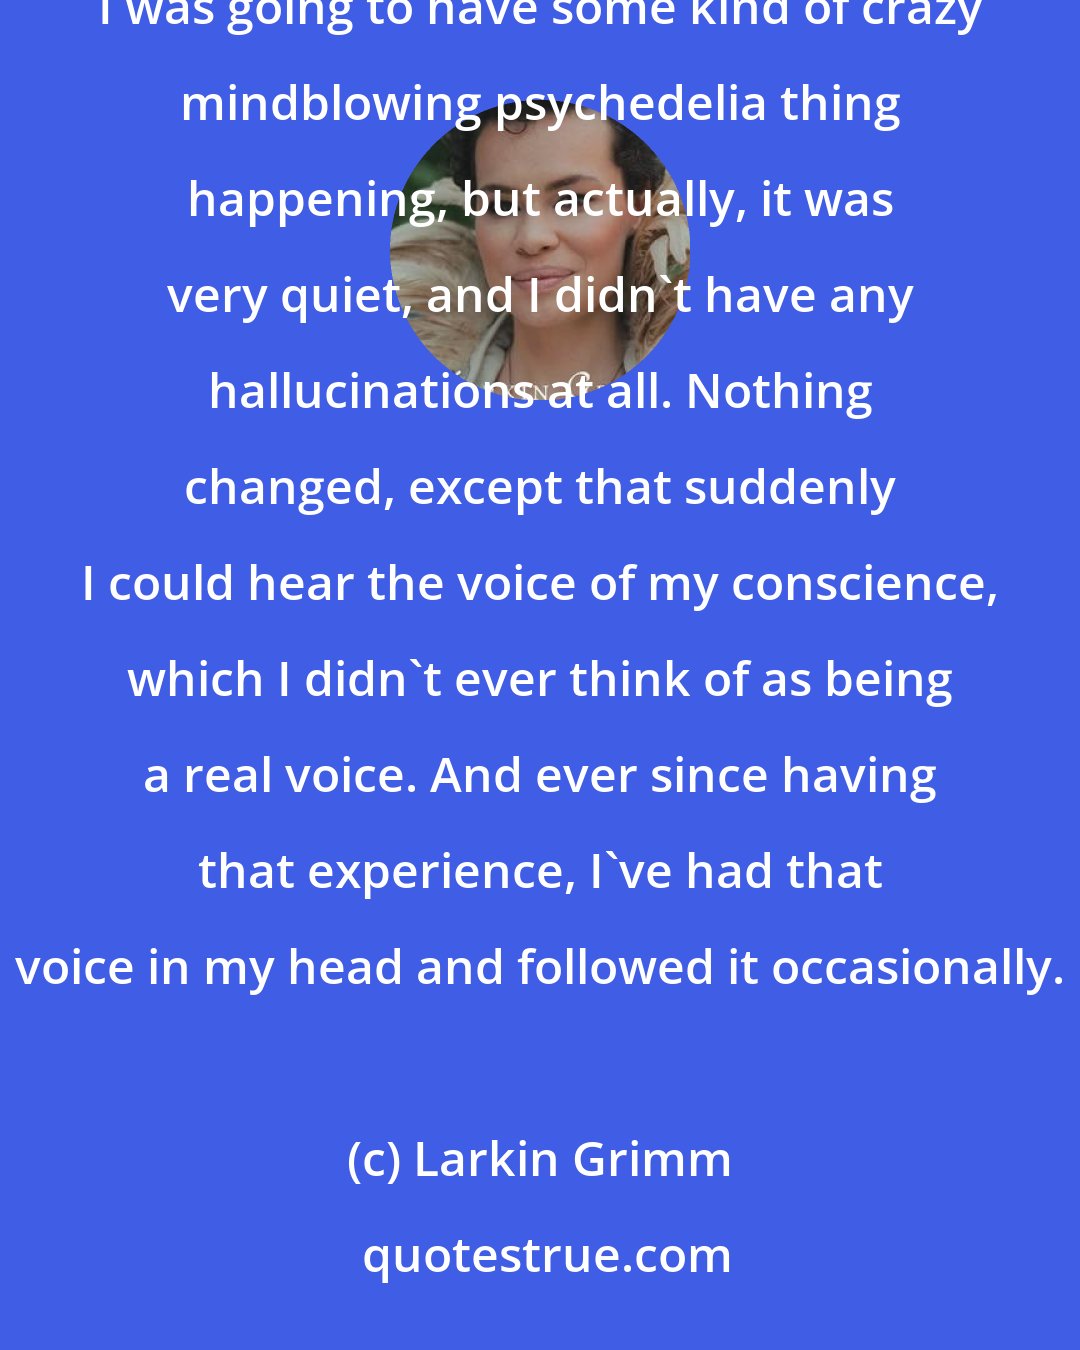 Larkin Grimm: I've always been curious about people's psychedelic experiences, and I kind of had this assumption that I was going to have some kind of crazy mindblowing psychedelia thing happening, but actually, it was very quiet, and I didn't have any hallucinations at all. Nothing changed, except that suddenly I could hear the voice of my conscience, which I didn't ever think of as being a real voice. And ever since having that experience, I've had that voice in my head and followed it occasionally.